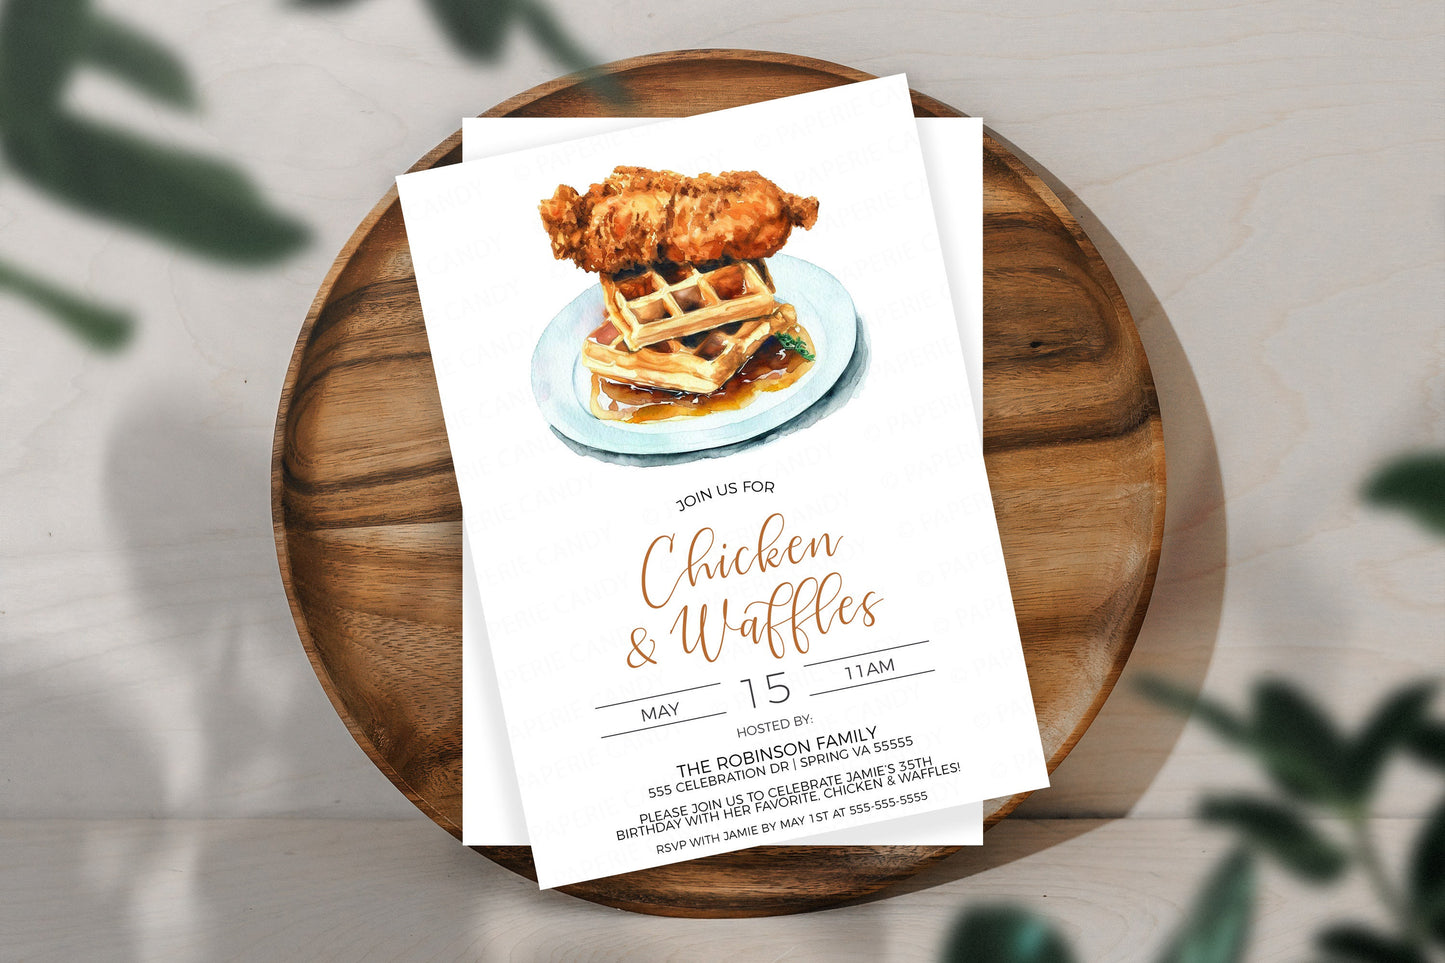 Chicken And Waffles Invitation, Fried Chicken And Waffles Invite, Birthday Breakfast Party, Couples Shower Baby Shower, Editable Printable